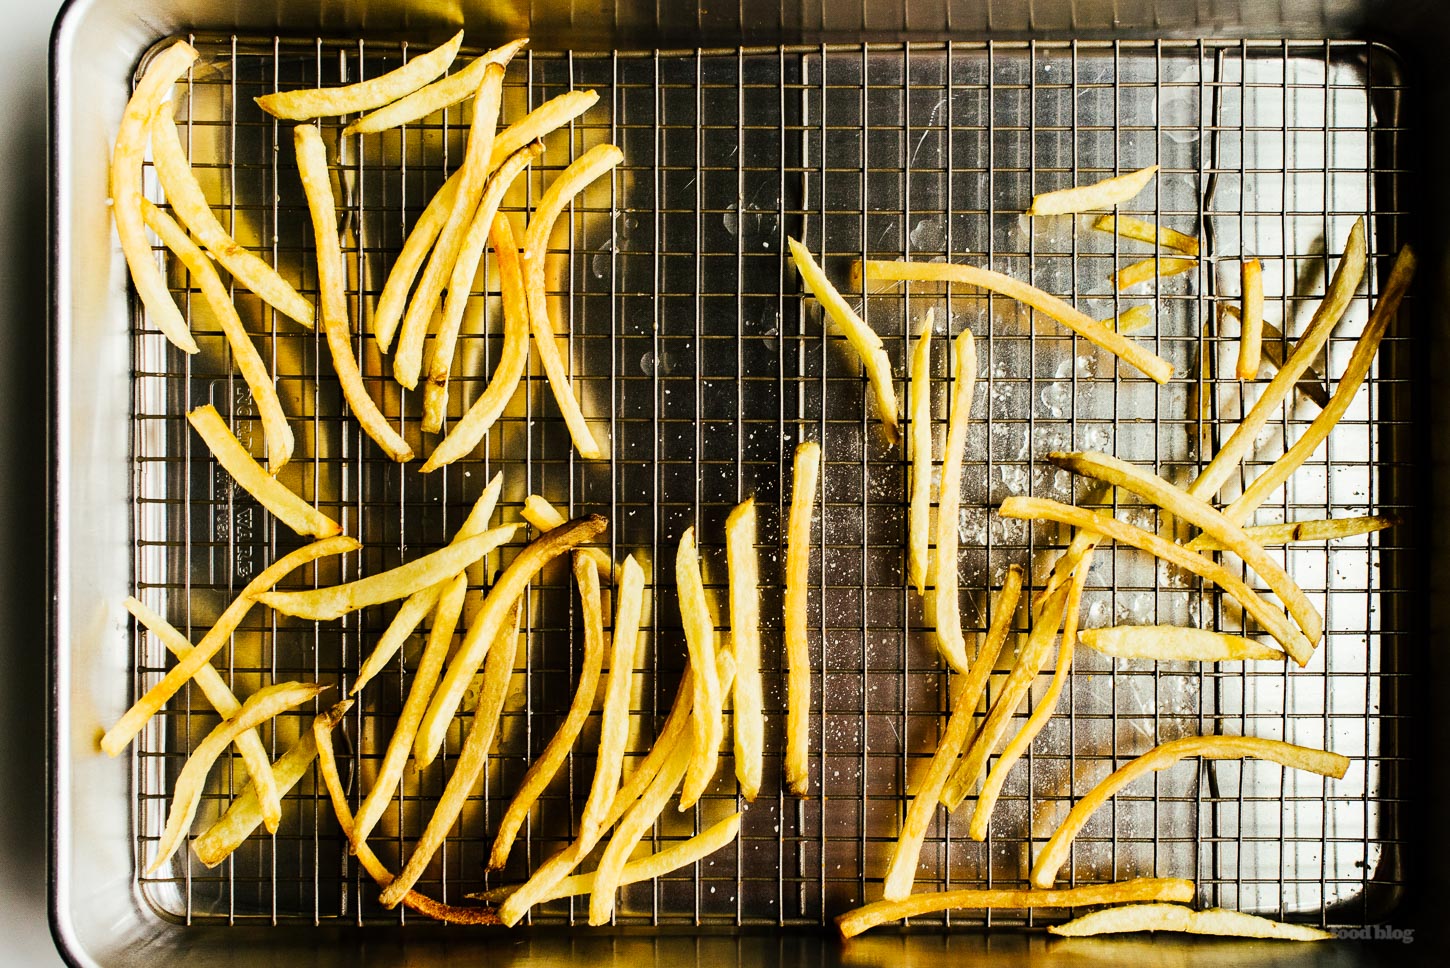 The easiest way to make homemade french fries - www.iamafoodblog.com